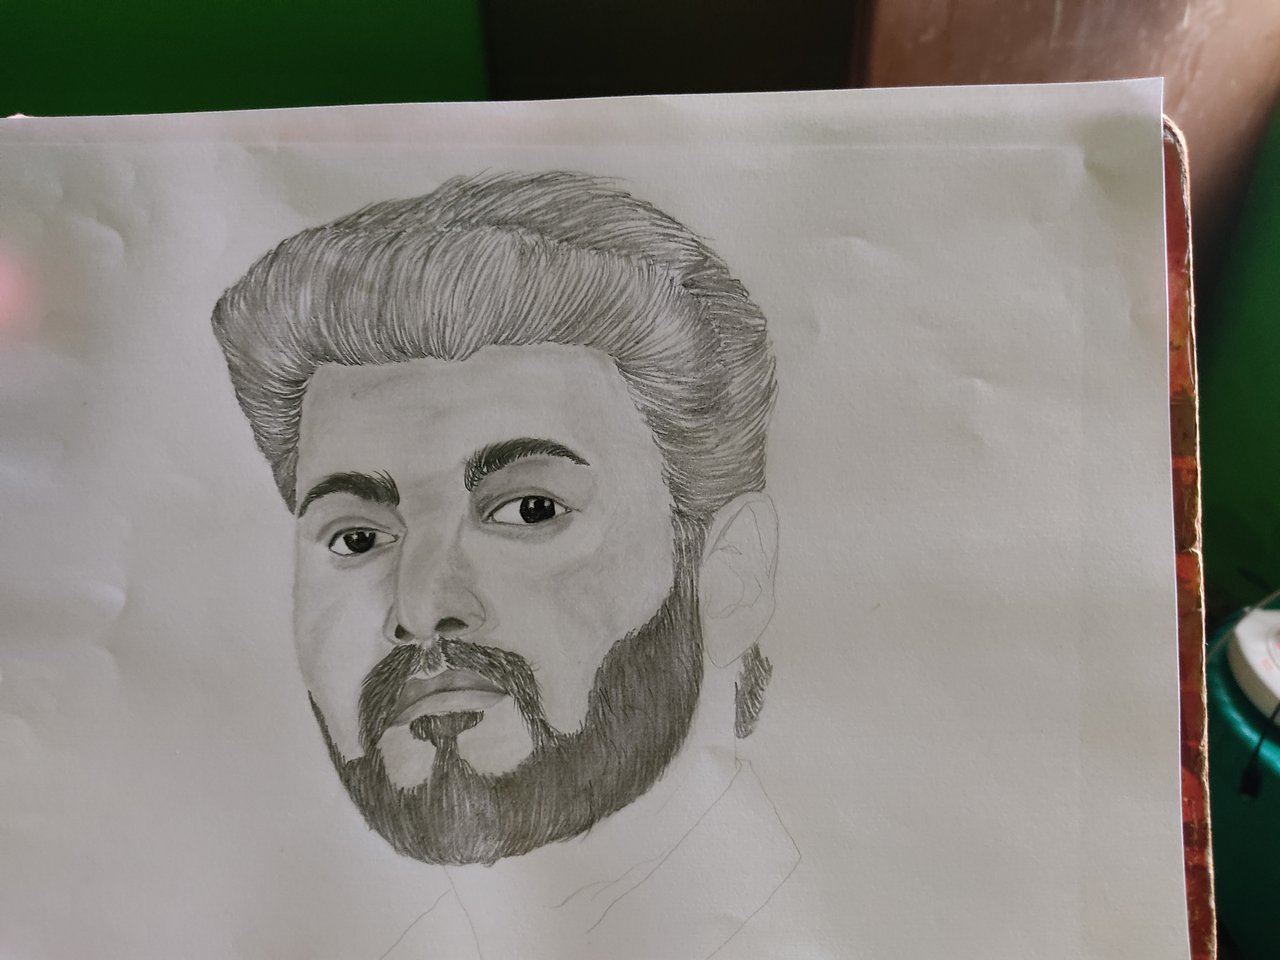 Sketch of Tovino Thomas an Indian actor